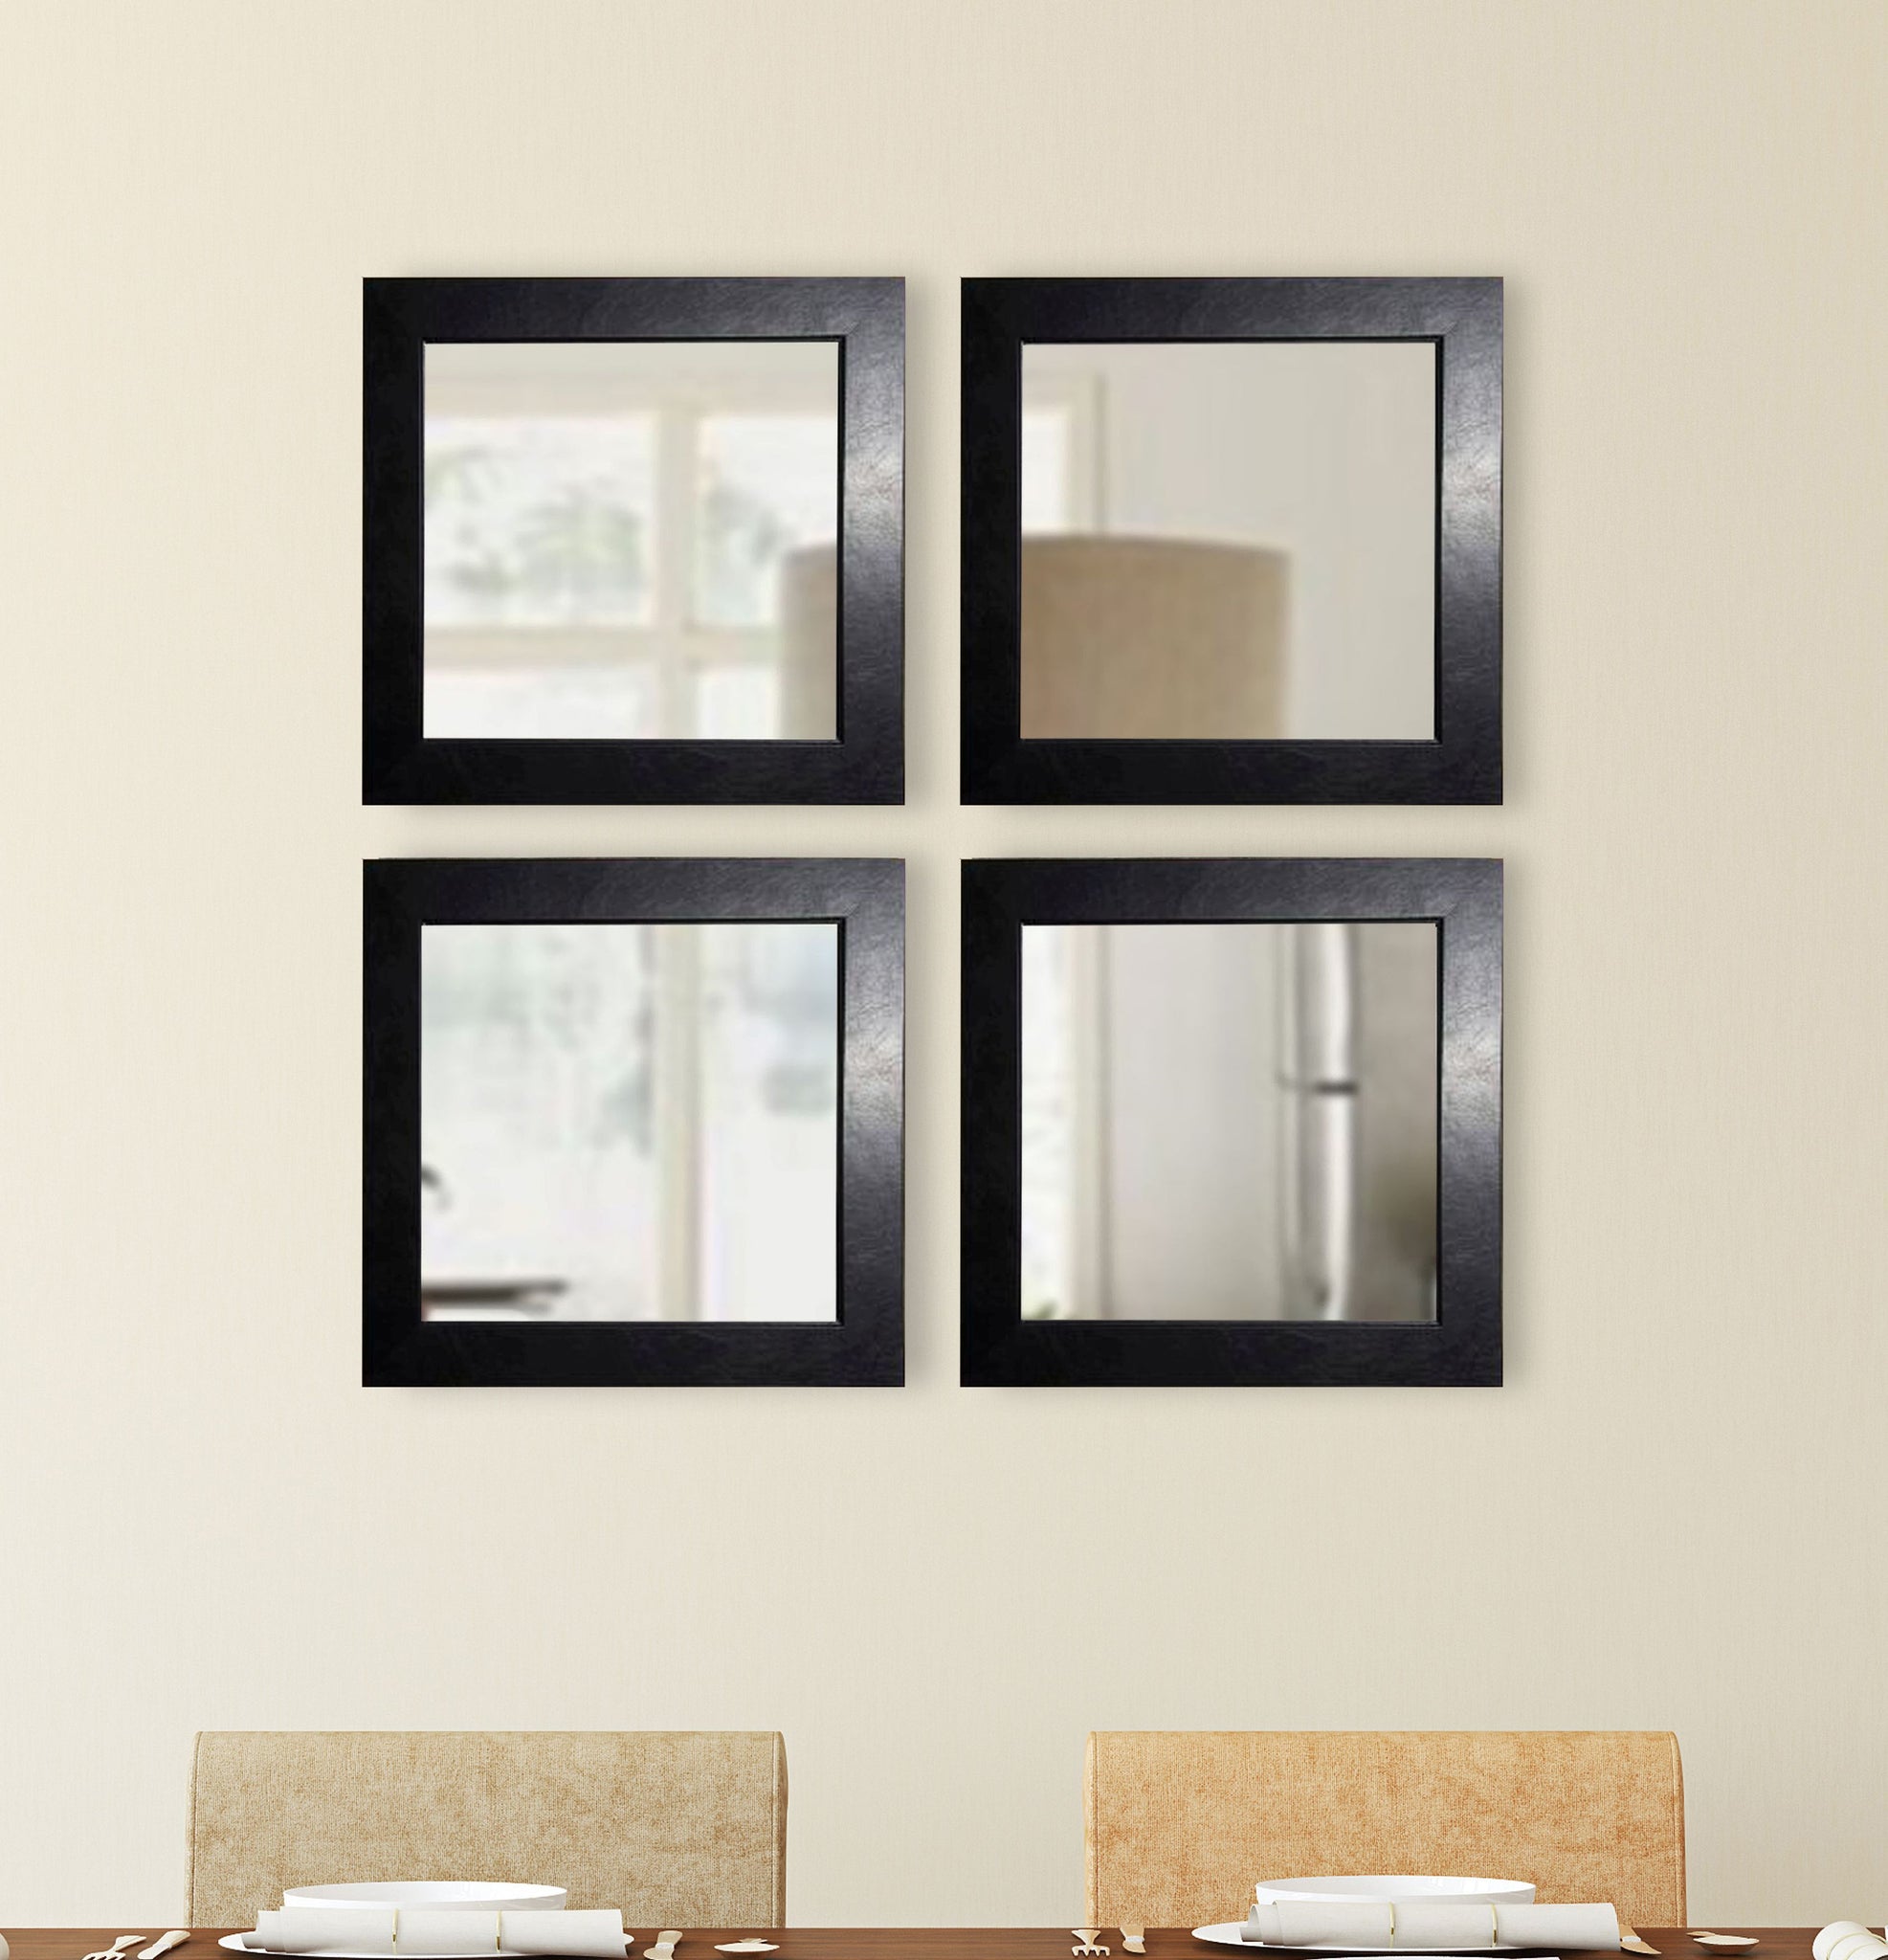  4 Set Square Black Mirrors for Wall Metal Mirrors for Home  Décor Decorative Mirrors Hanging Horizontal or Vertical (4 Set Square  Wires, 4) : Home & Kitchen